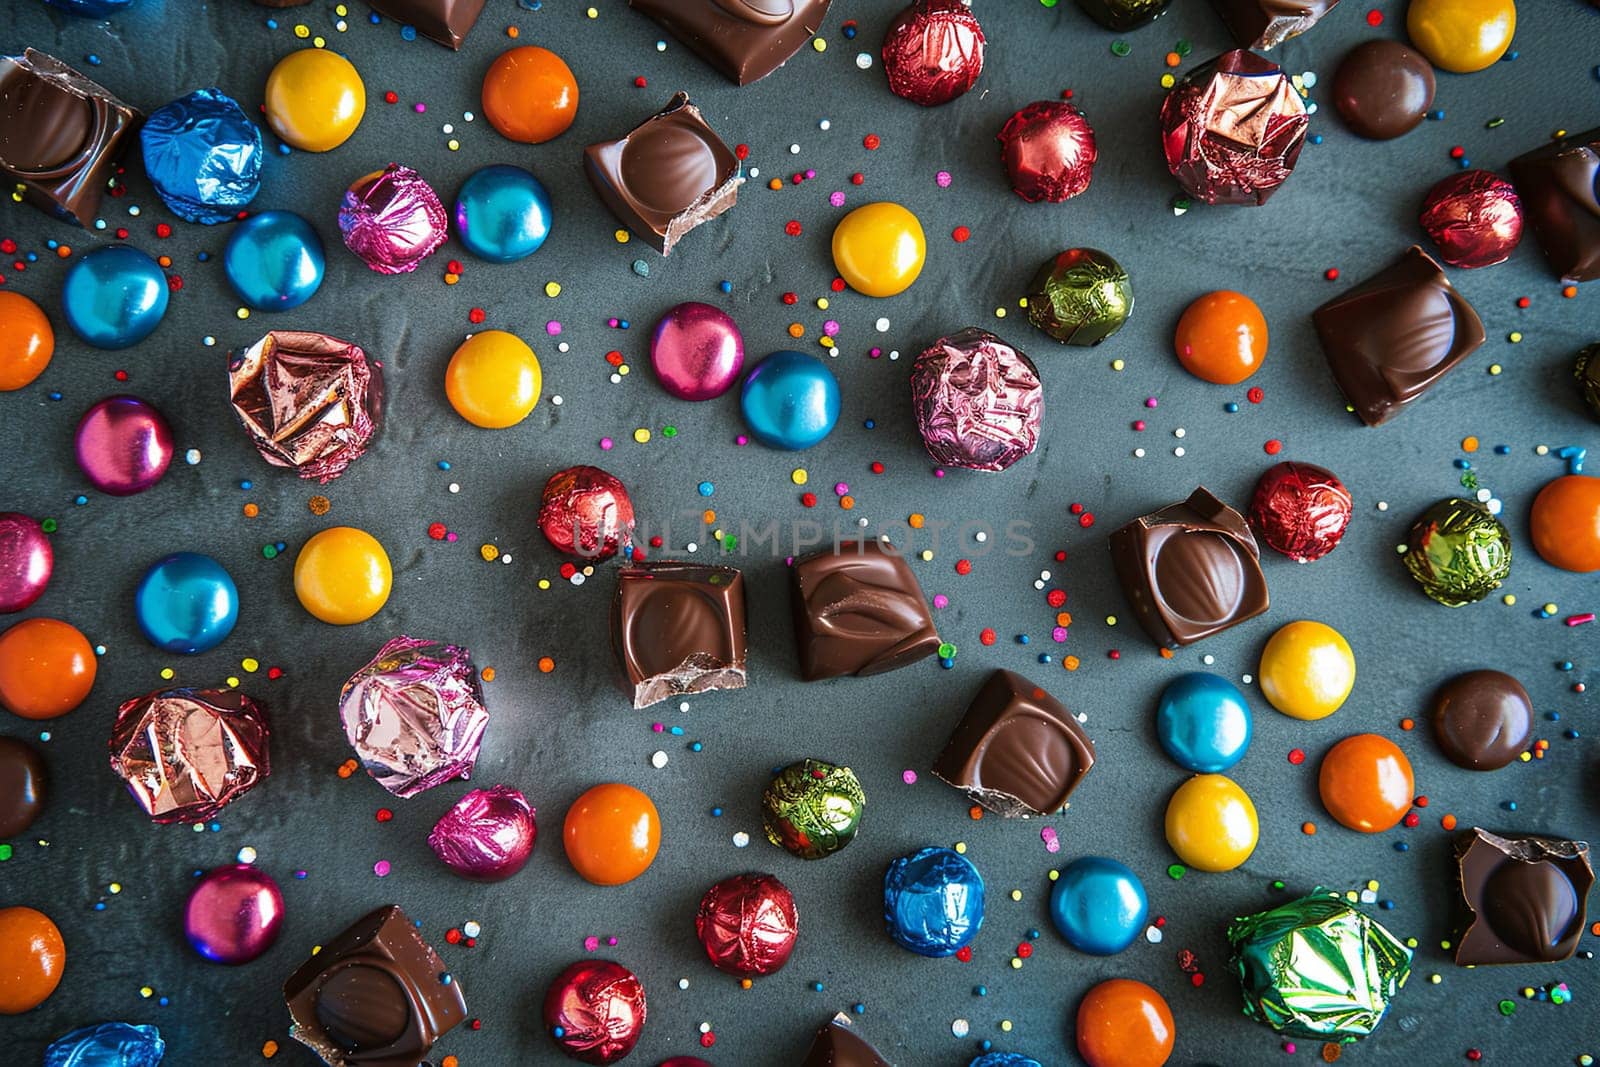 Diverse assortment of shiny wrapped chocolates and sweets covering a table.